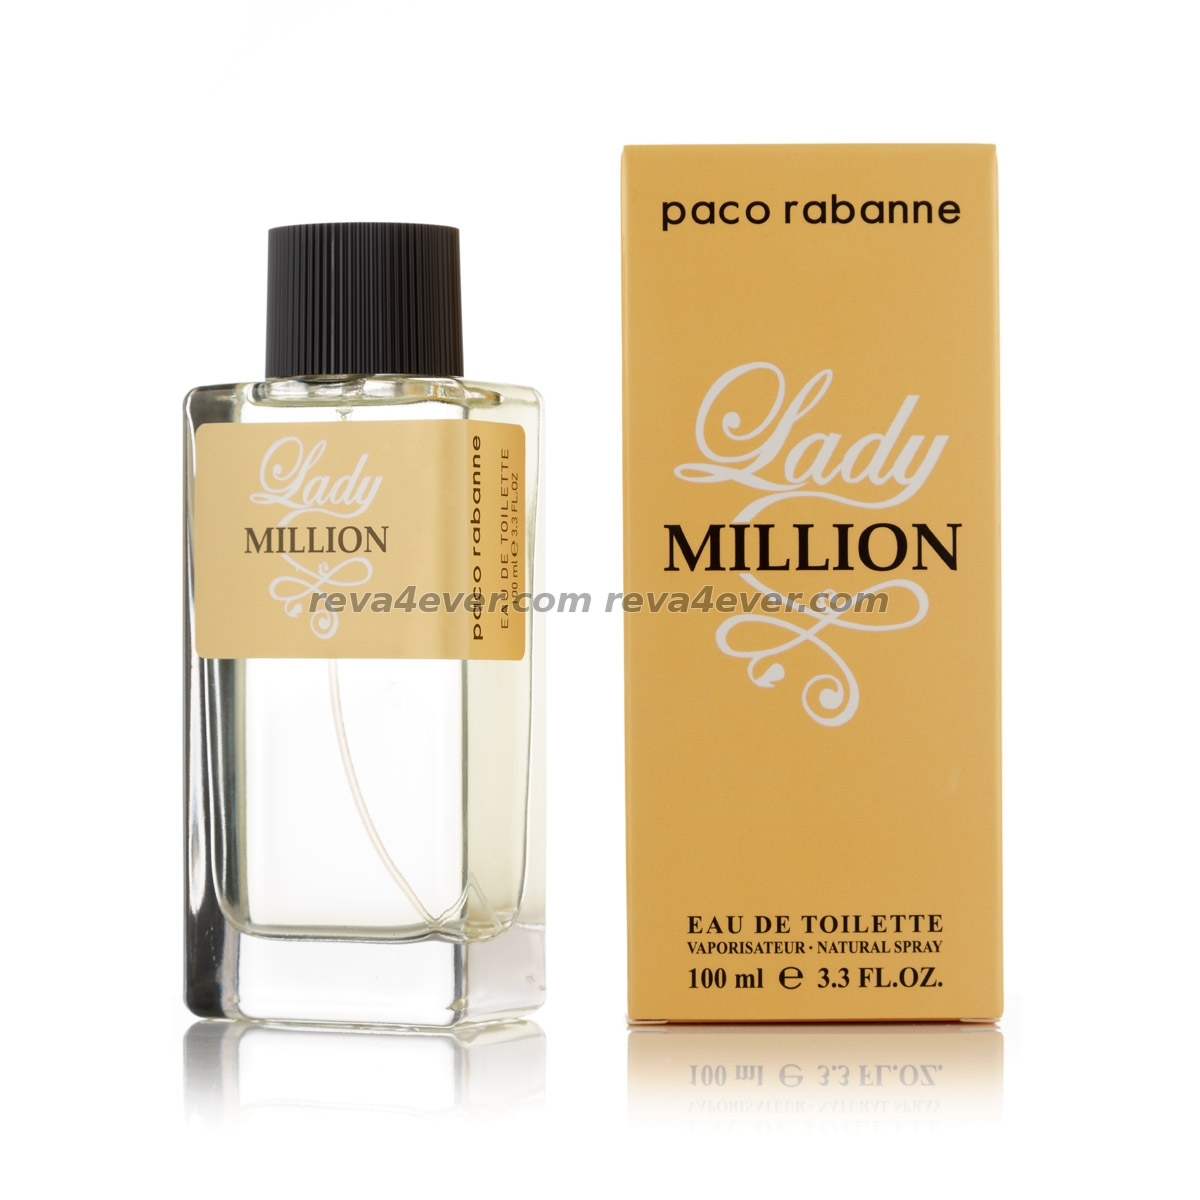 Paco Rabanne Lady Million edt 100ml Imperatrice style